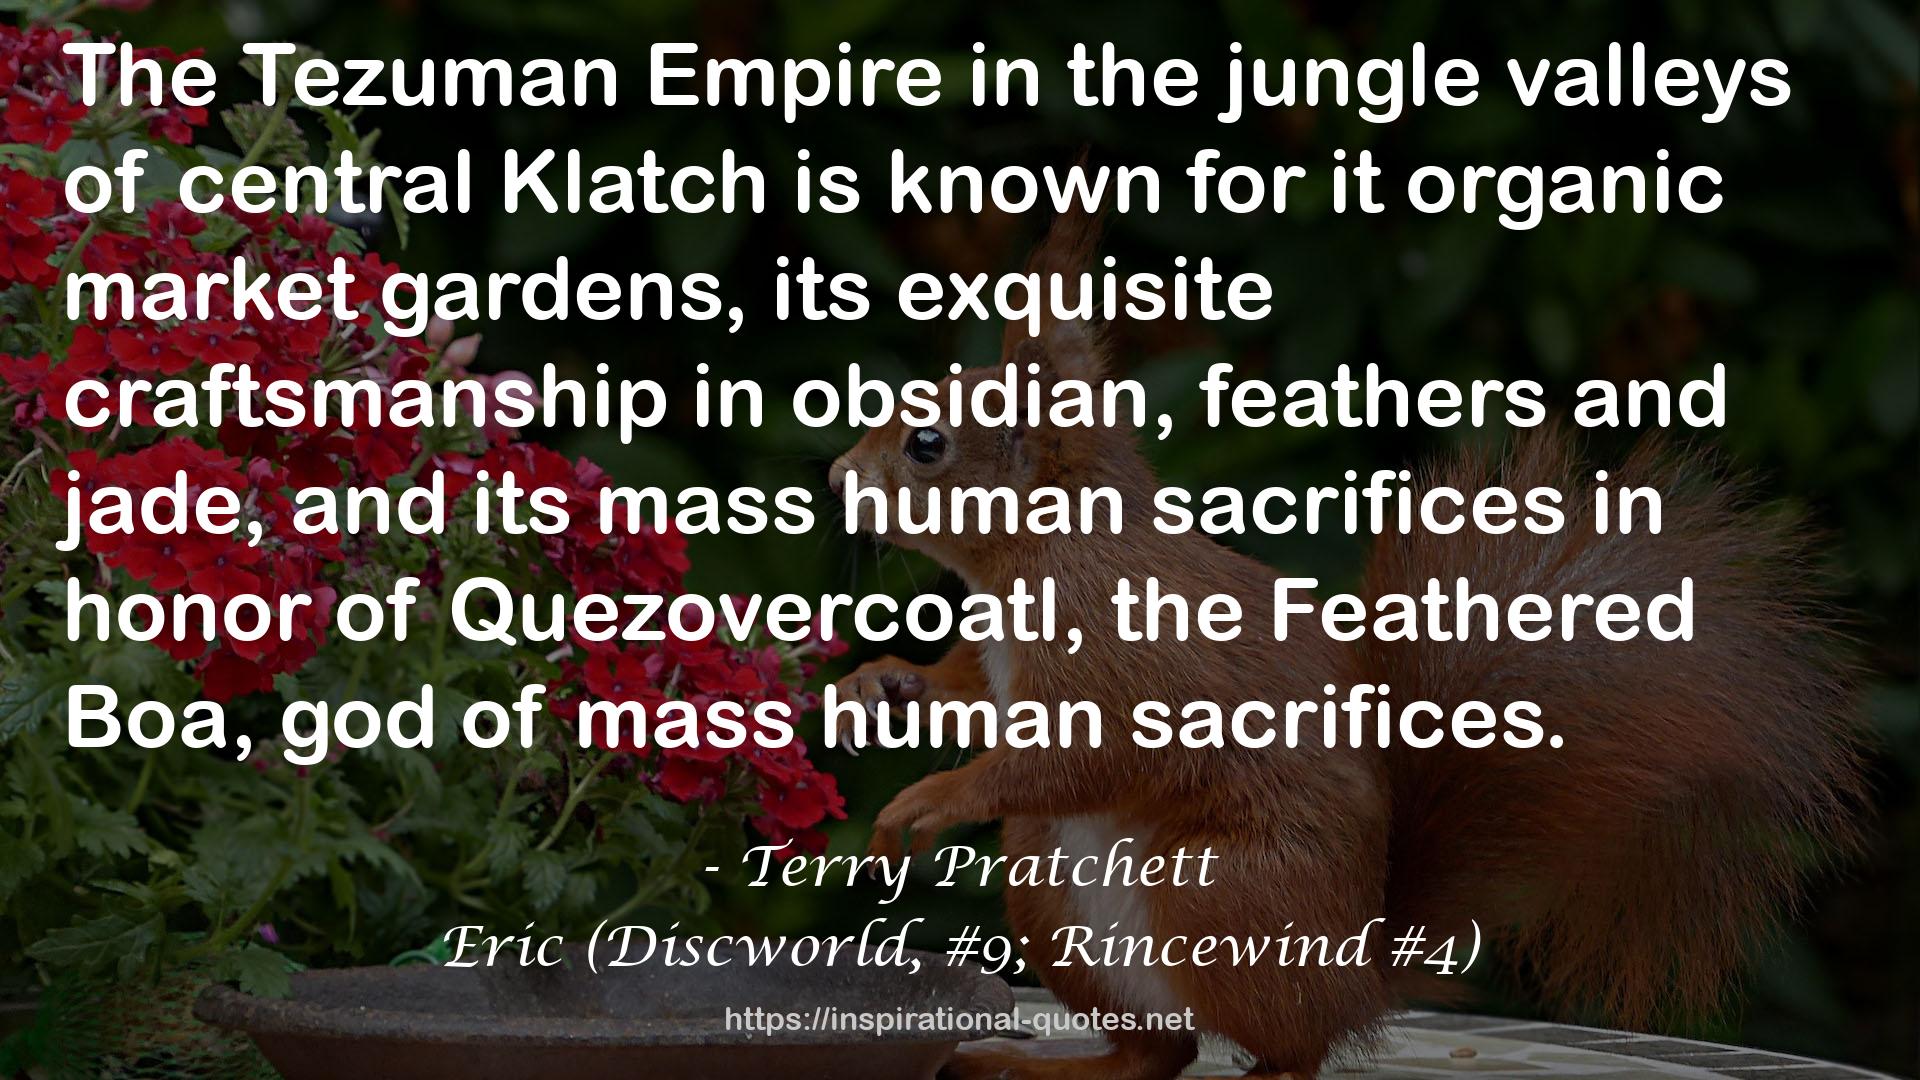 Eric (Discworld, #9; Rincewind #4) QUOTES